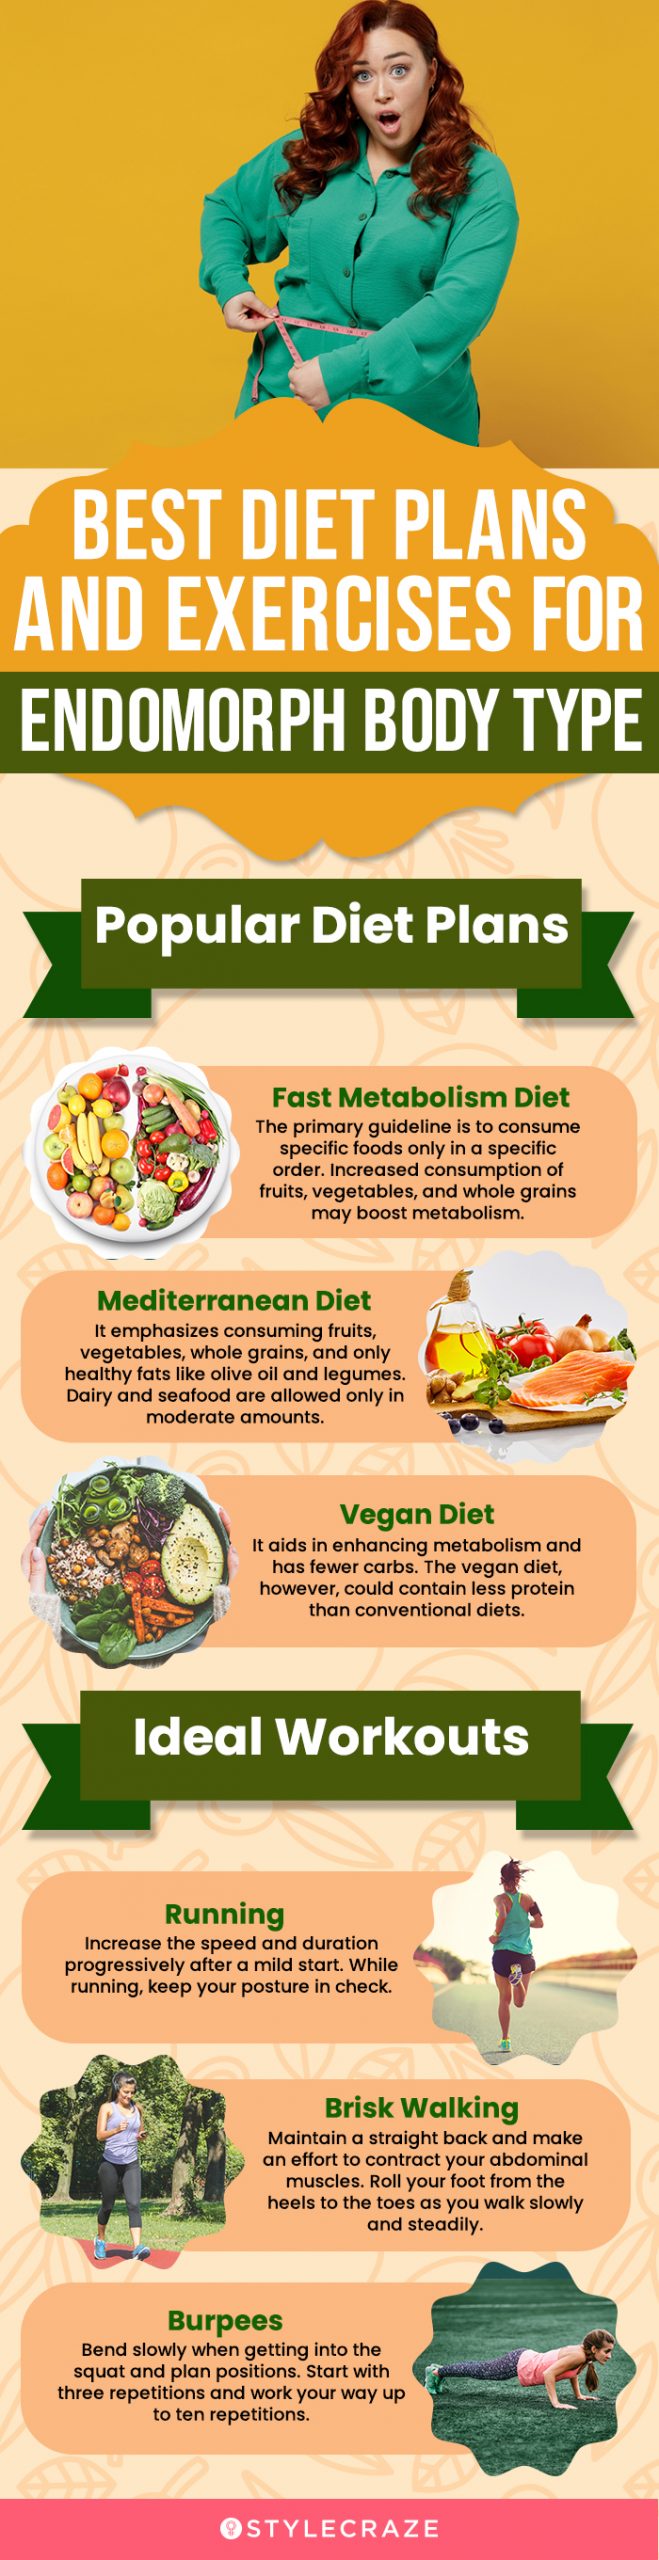 best diet plans and exercise for endomorph body type (infographic)